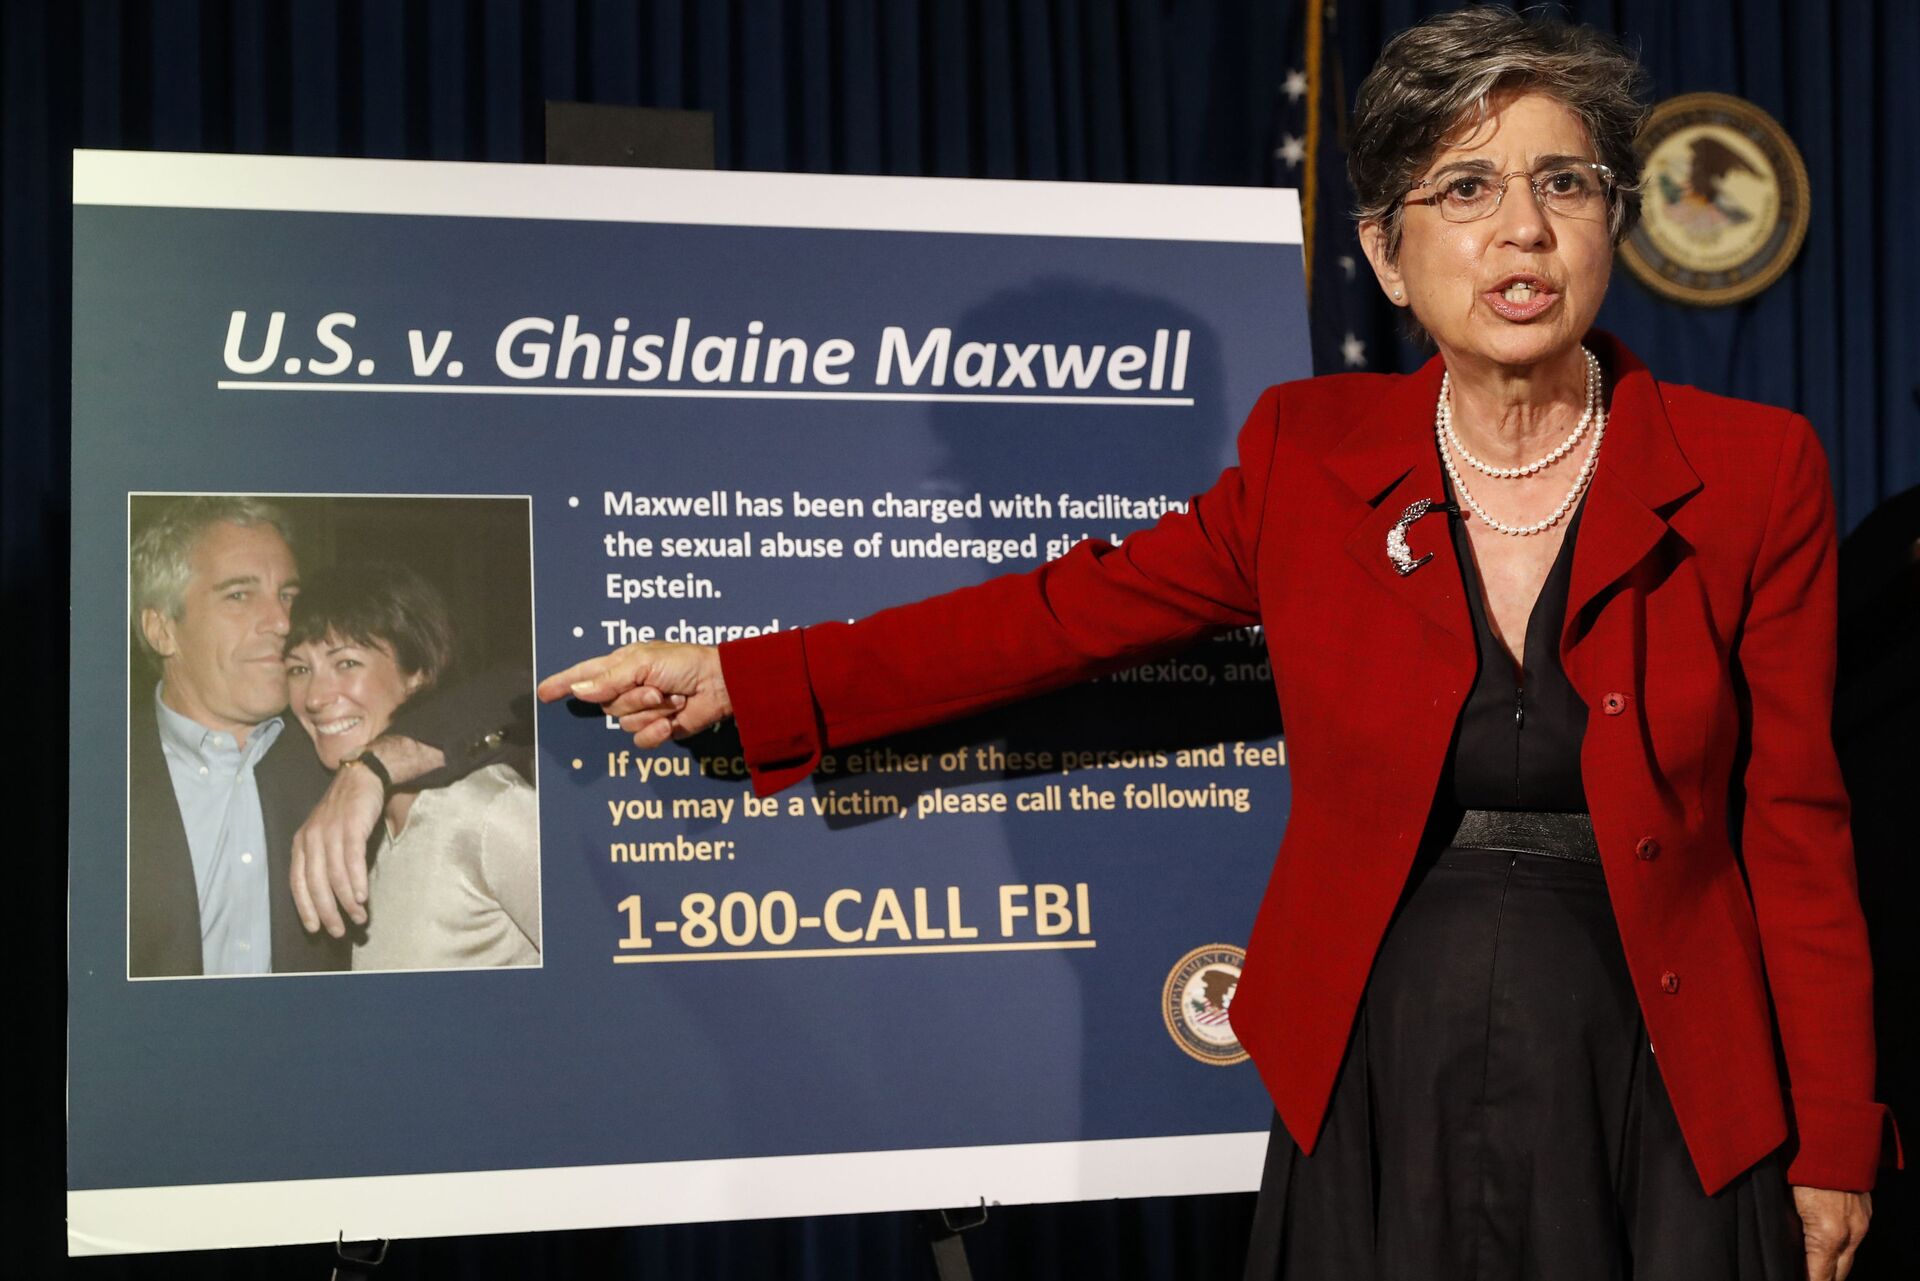  In this July 2, 2020 file photo, Audrey Strauss, Acting United States Attorney for the Southern District of New York, speaks during a news conference in New York, to announce charges against Ghislaine Maxwell for her alleged role in the sexual exploitation and abuse of multiple minor girls by Jeffrey Epstein - Sputnik International, 1920, 01.04.2022